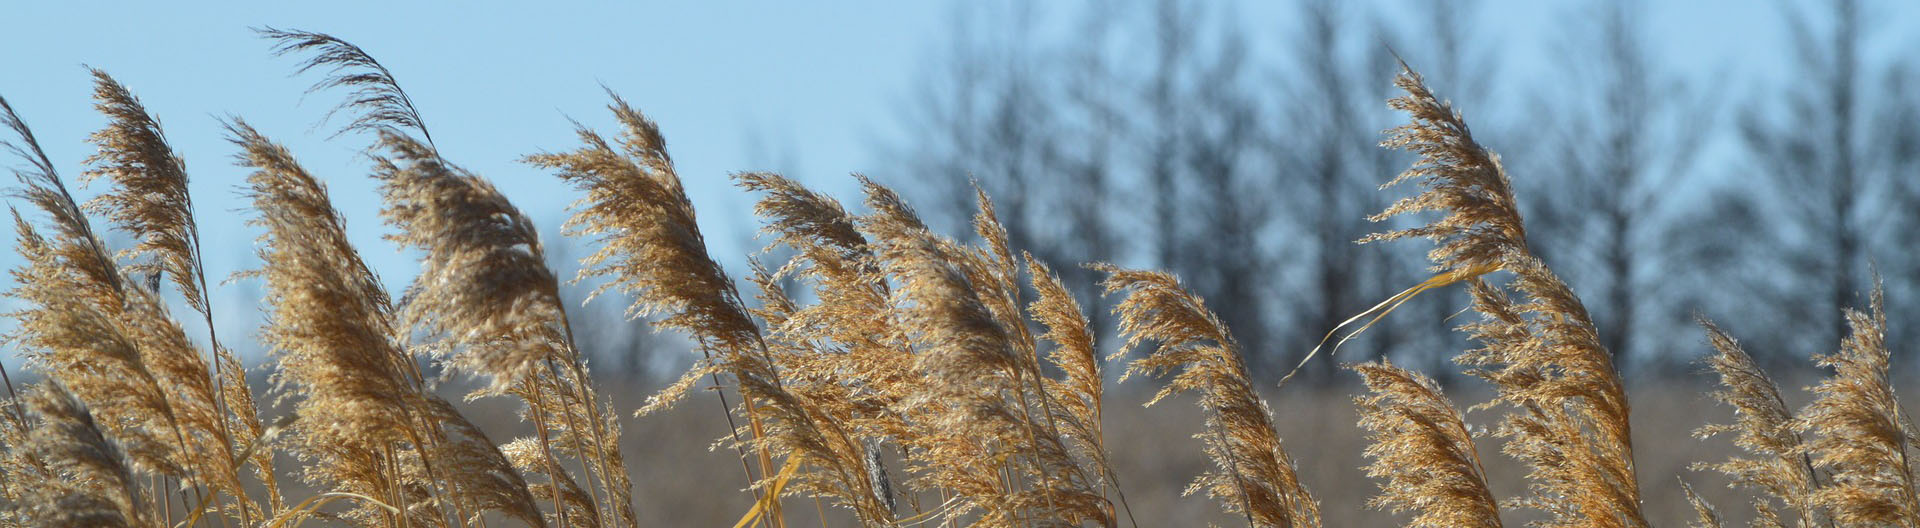 Tall strand of wheat blow in the wind